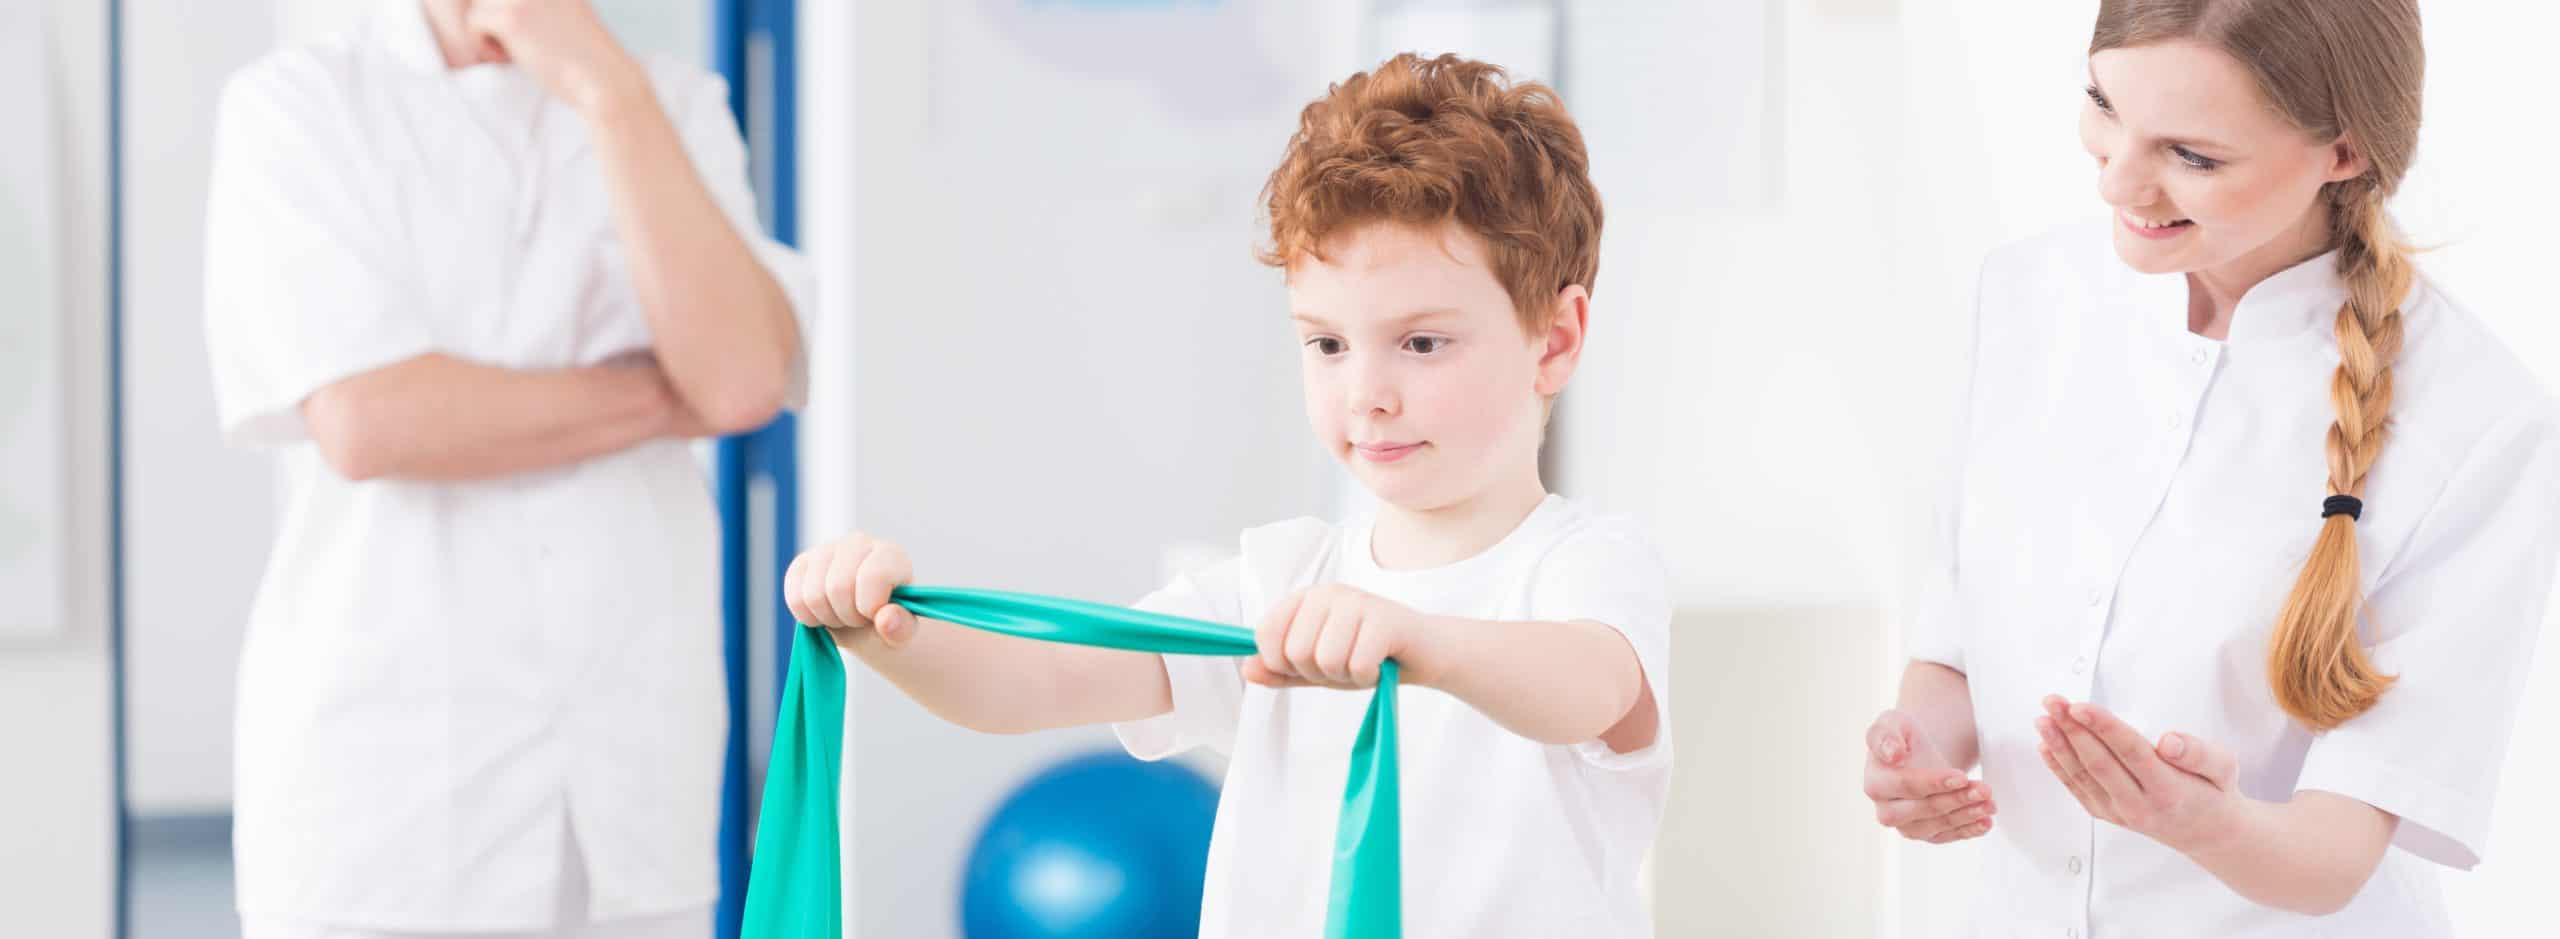 How Paediatric Physio Can Help With Disabilities